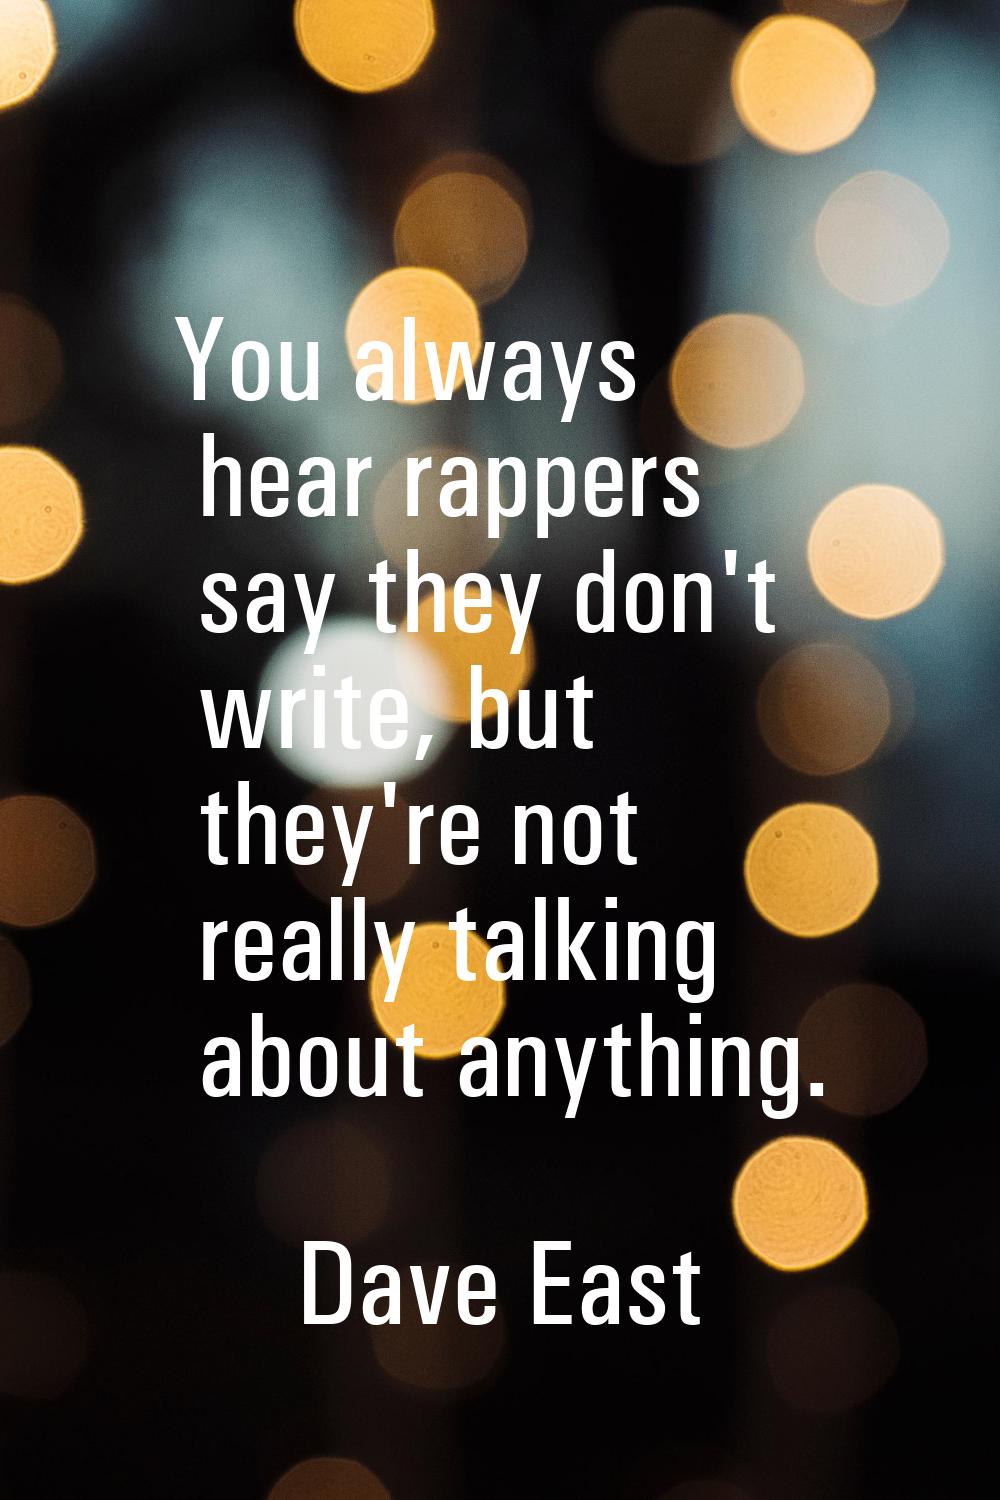 You always hear rappers say they don't write, but they're not really talking about anything.